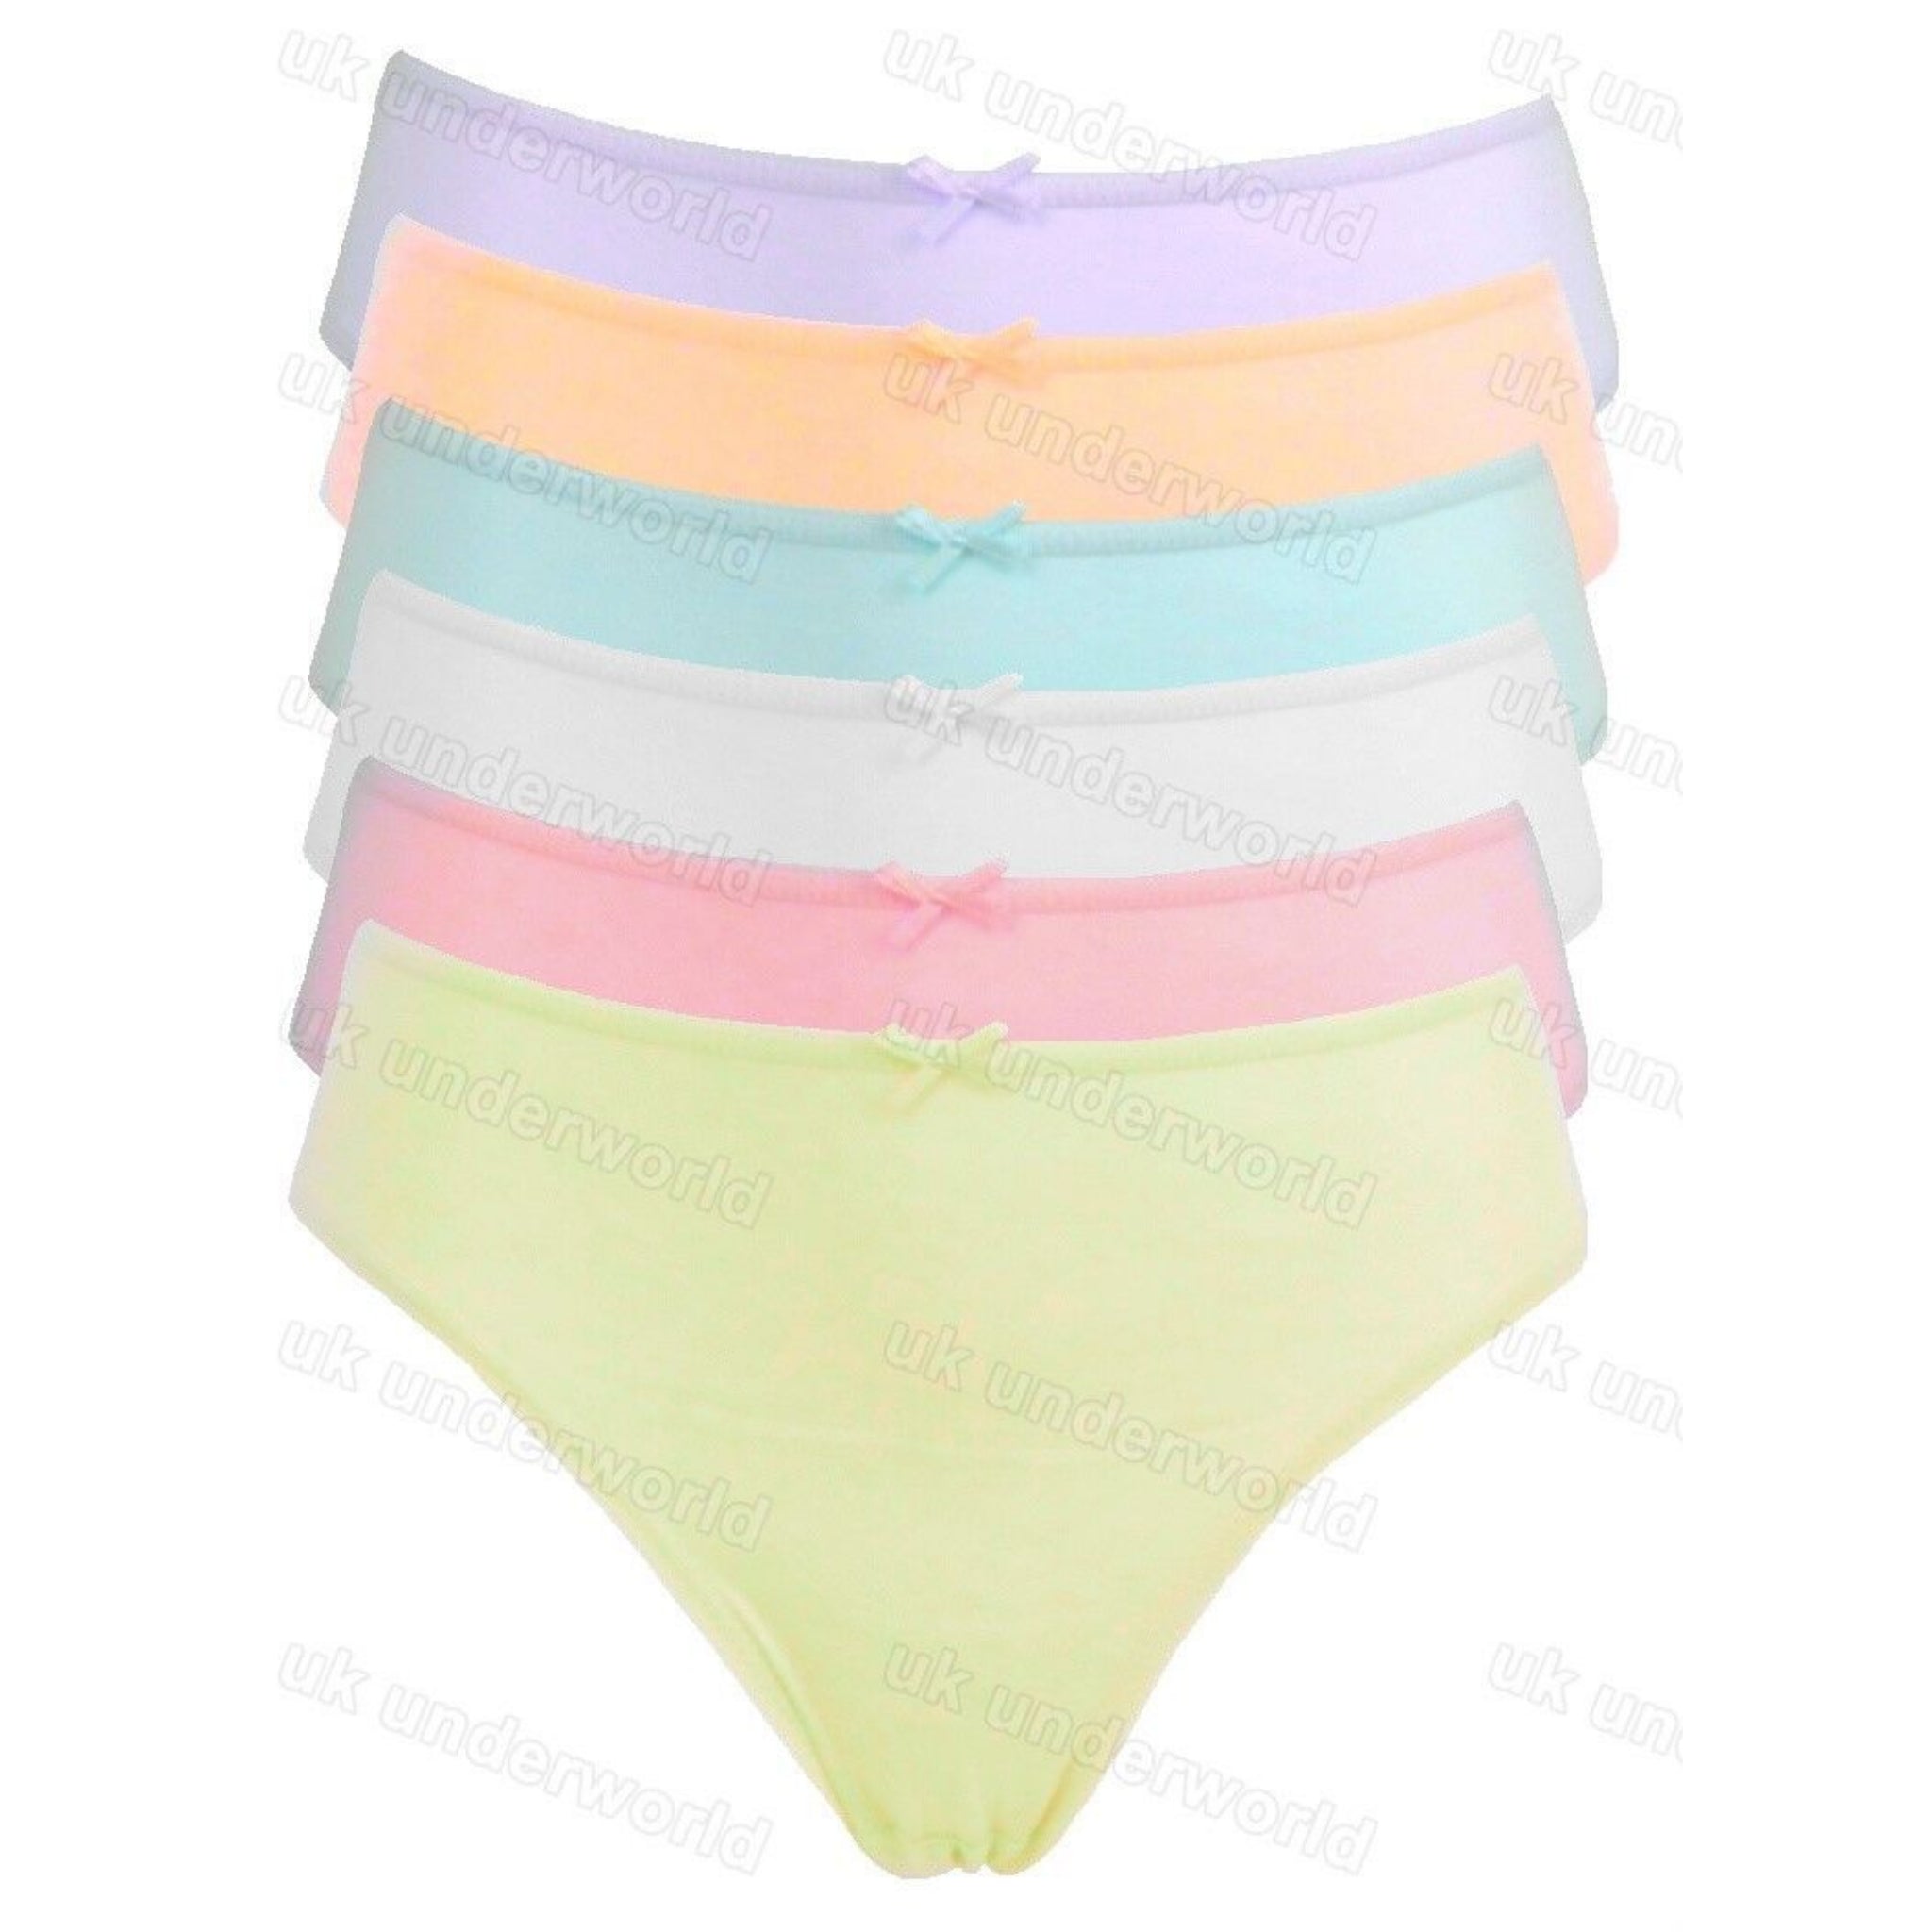 Beclen Harp 6 Pair Women/Ladies Cotton Plain And Floral Briefs Bikini Knickers Pants Underwears For Adults-Perfect Christmas/Xmas Gift